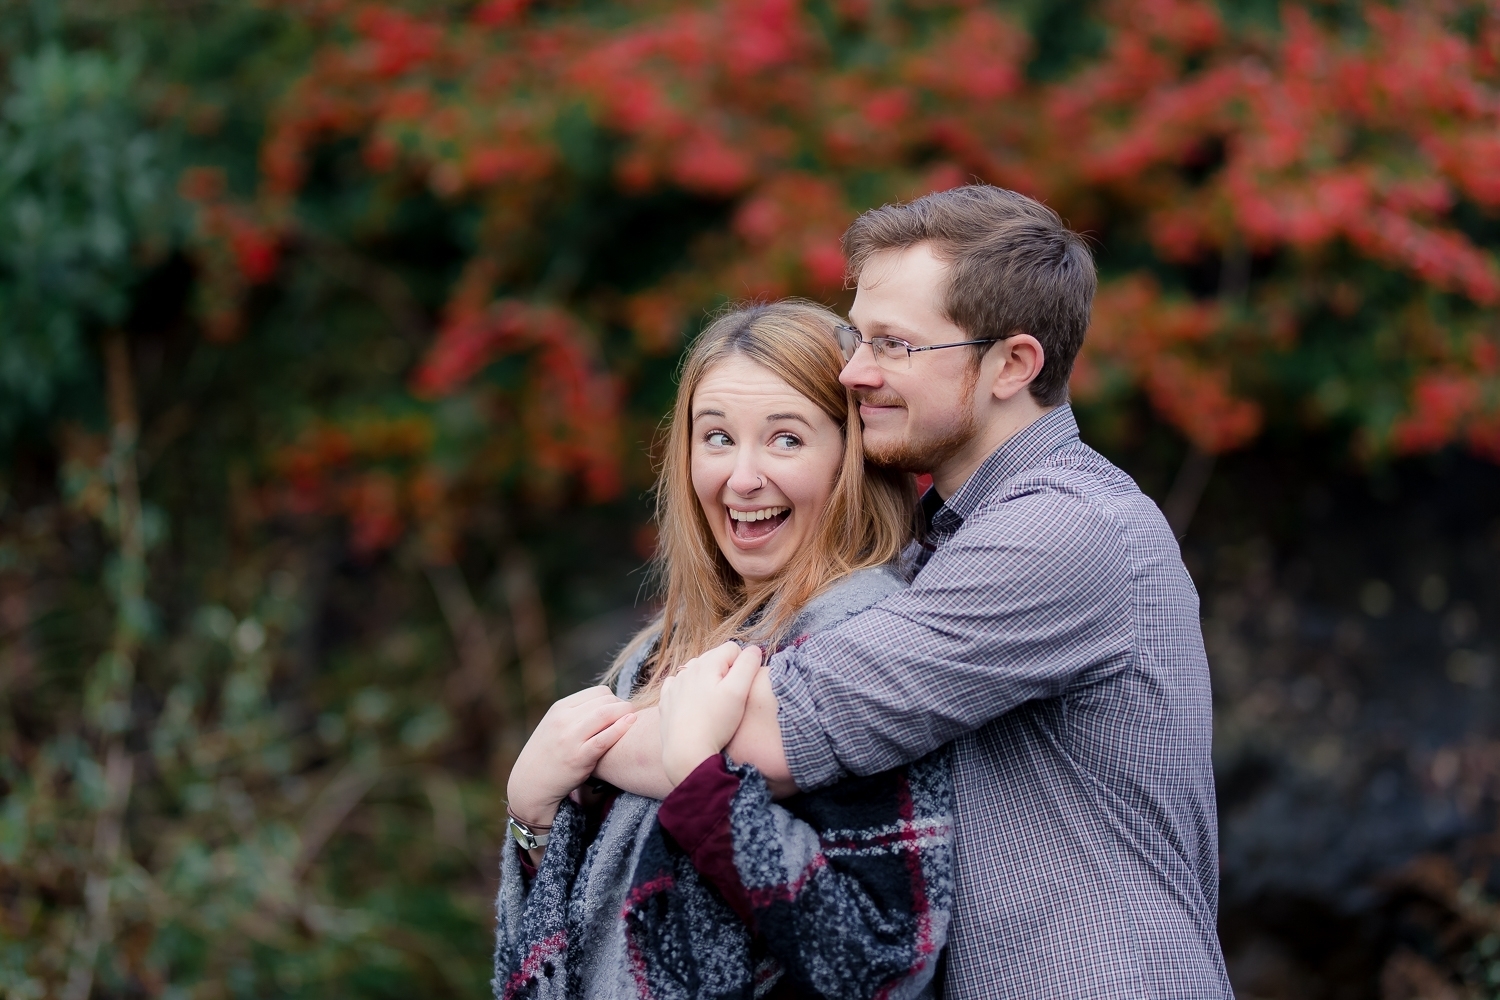 North Vancouver Engagement Photos